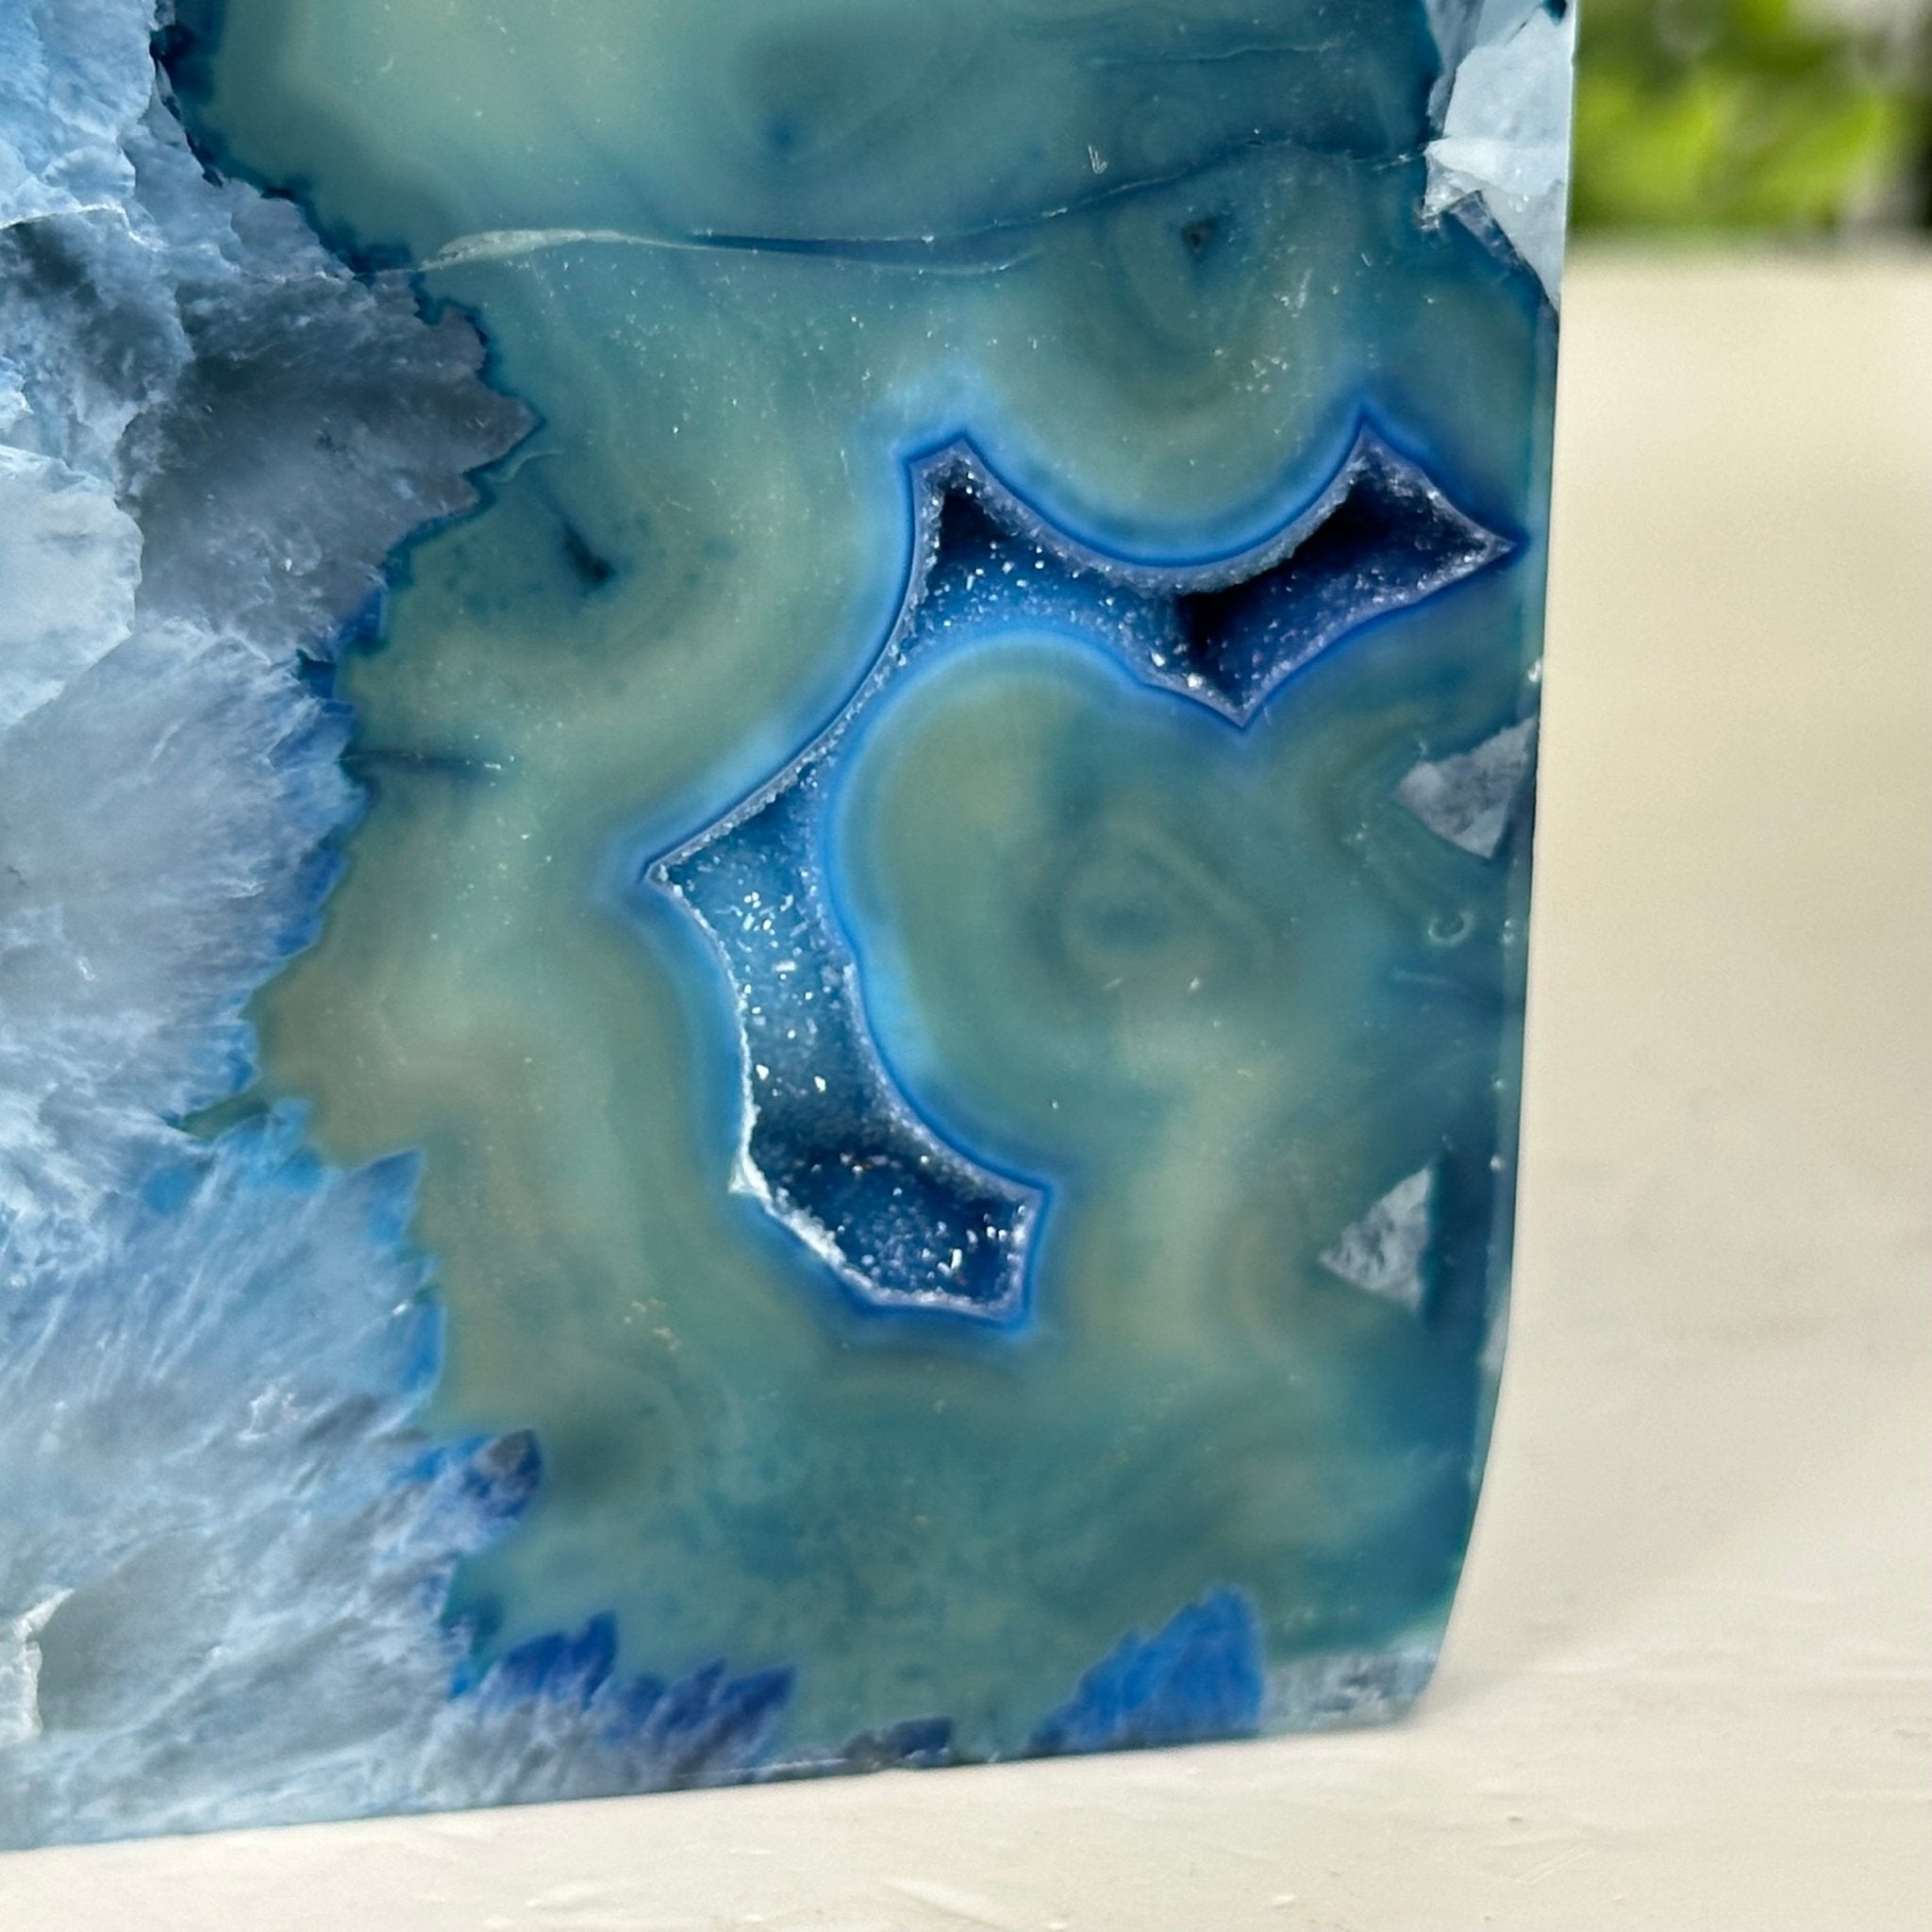 Blue Dyed Brazilian Agate Stone Bookends, 9.4 lbs & 5.5" tall #5151BL-039 - Brazil GemsBrazil GemsBlue Dyed Brazilian Agate Stone Bookends, 9.4 lbs & 5.5" tall #5151BL-039Bookends5151BL-039